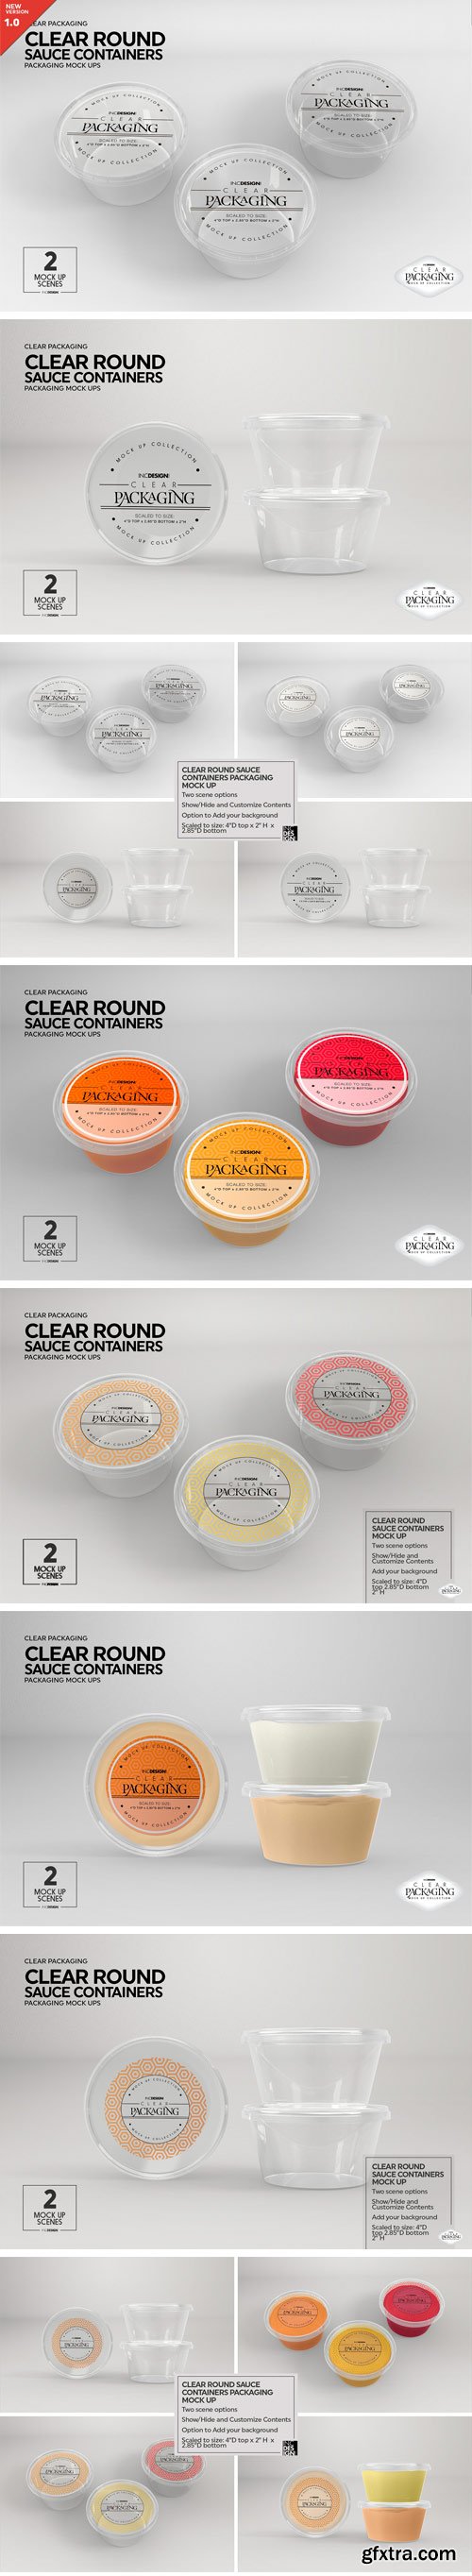 CM - Clear Round Sauce Containers MockUp 2221803